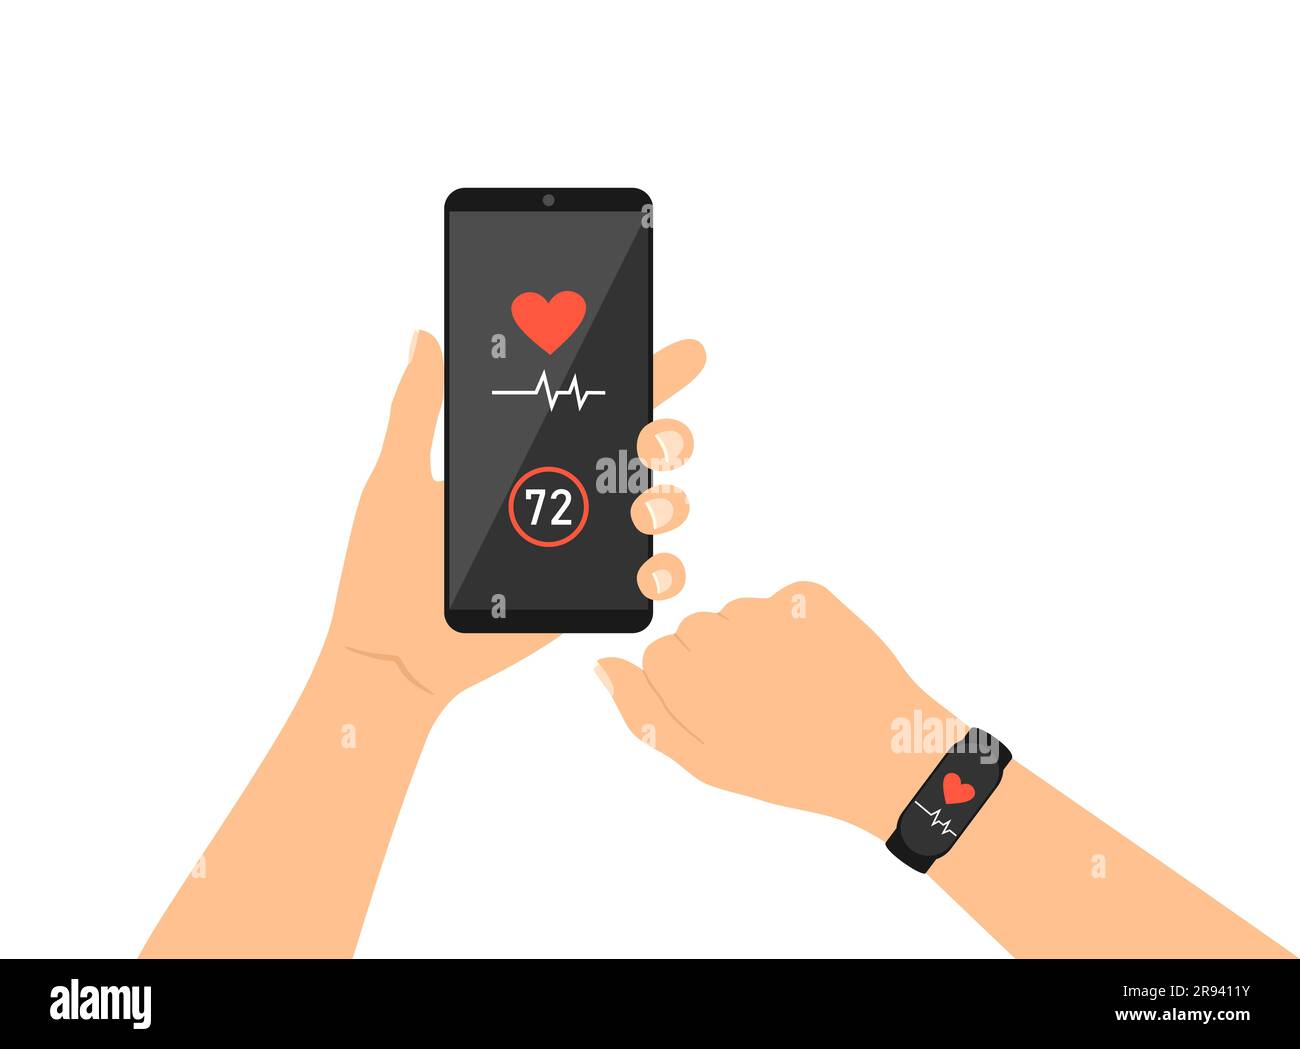 Monitoring heart rate with a fitness bracelet and a phone app. Hands with phone and fitness tracker on a white background Stock Vector